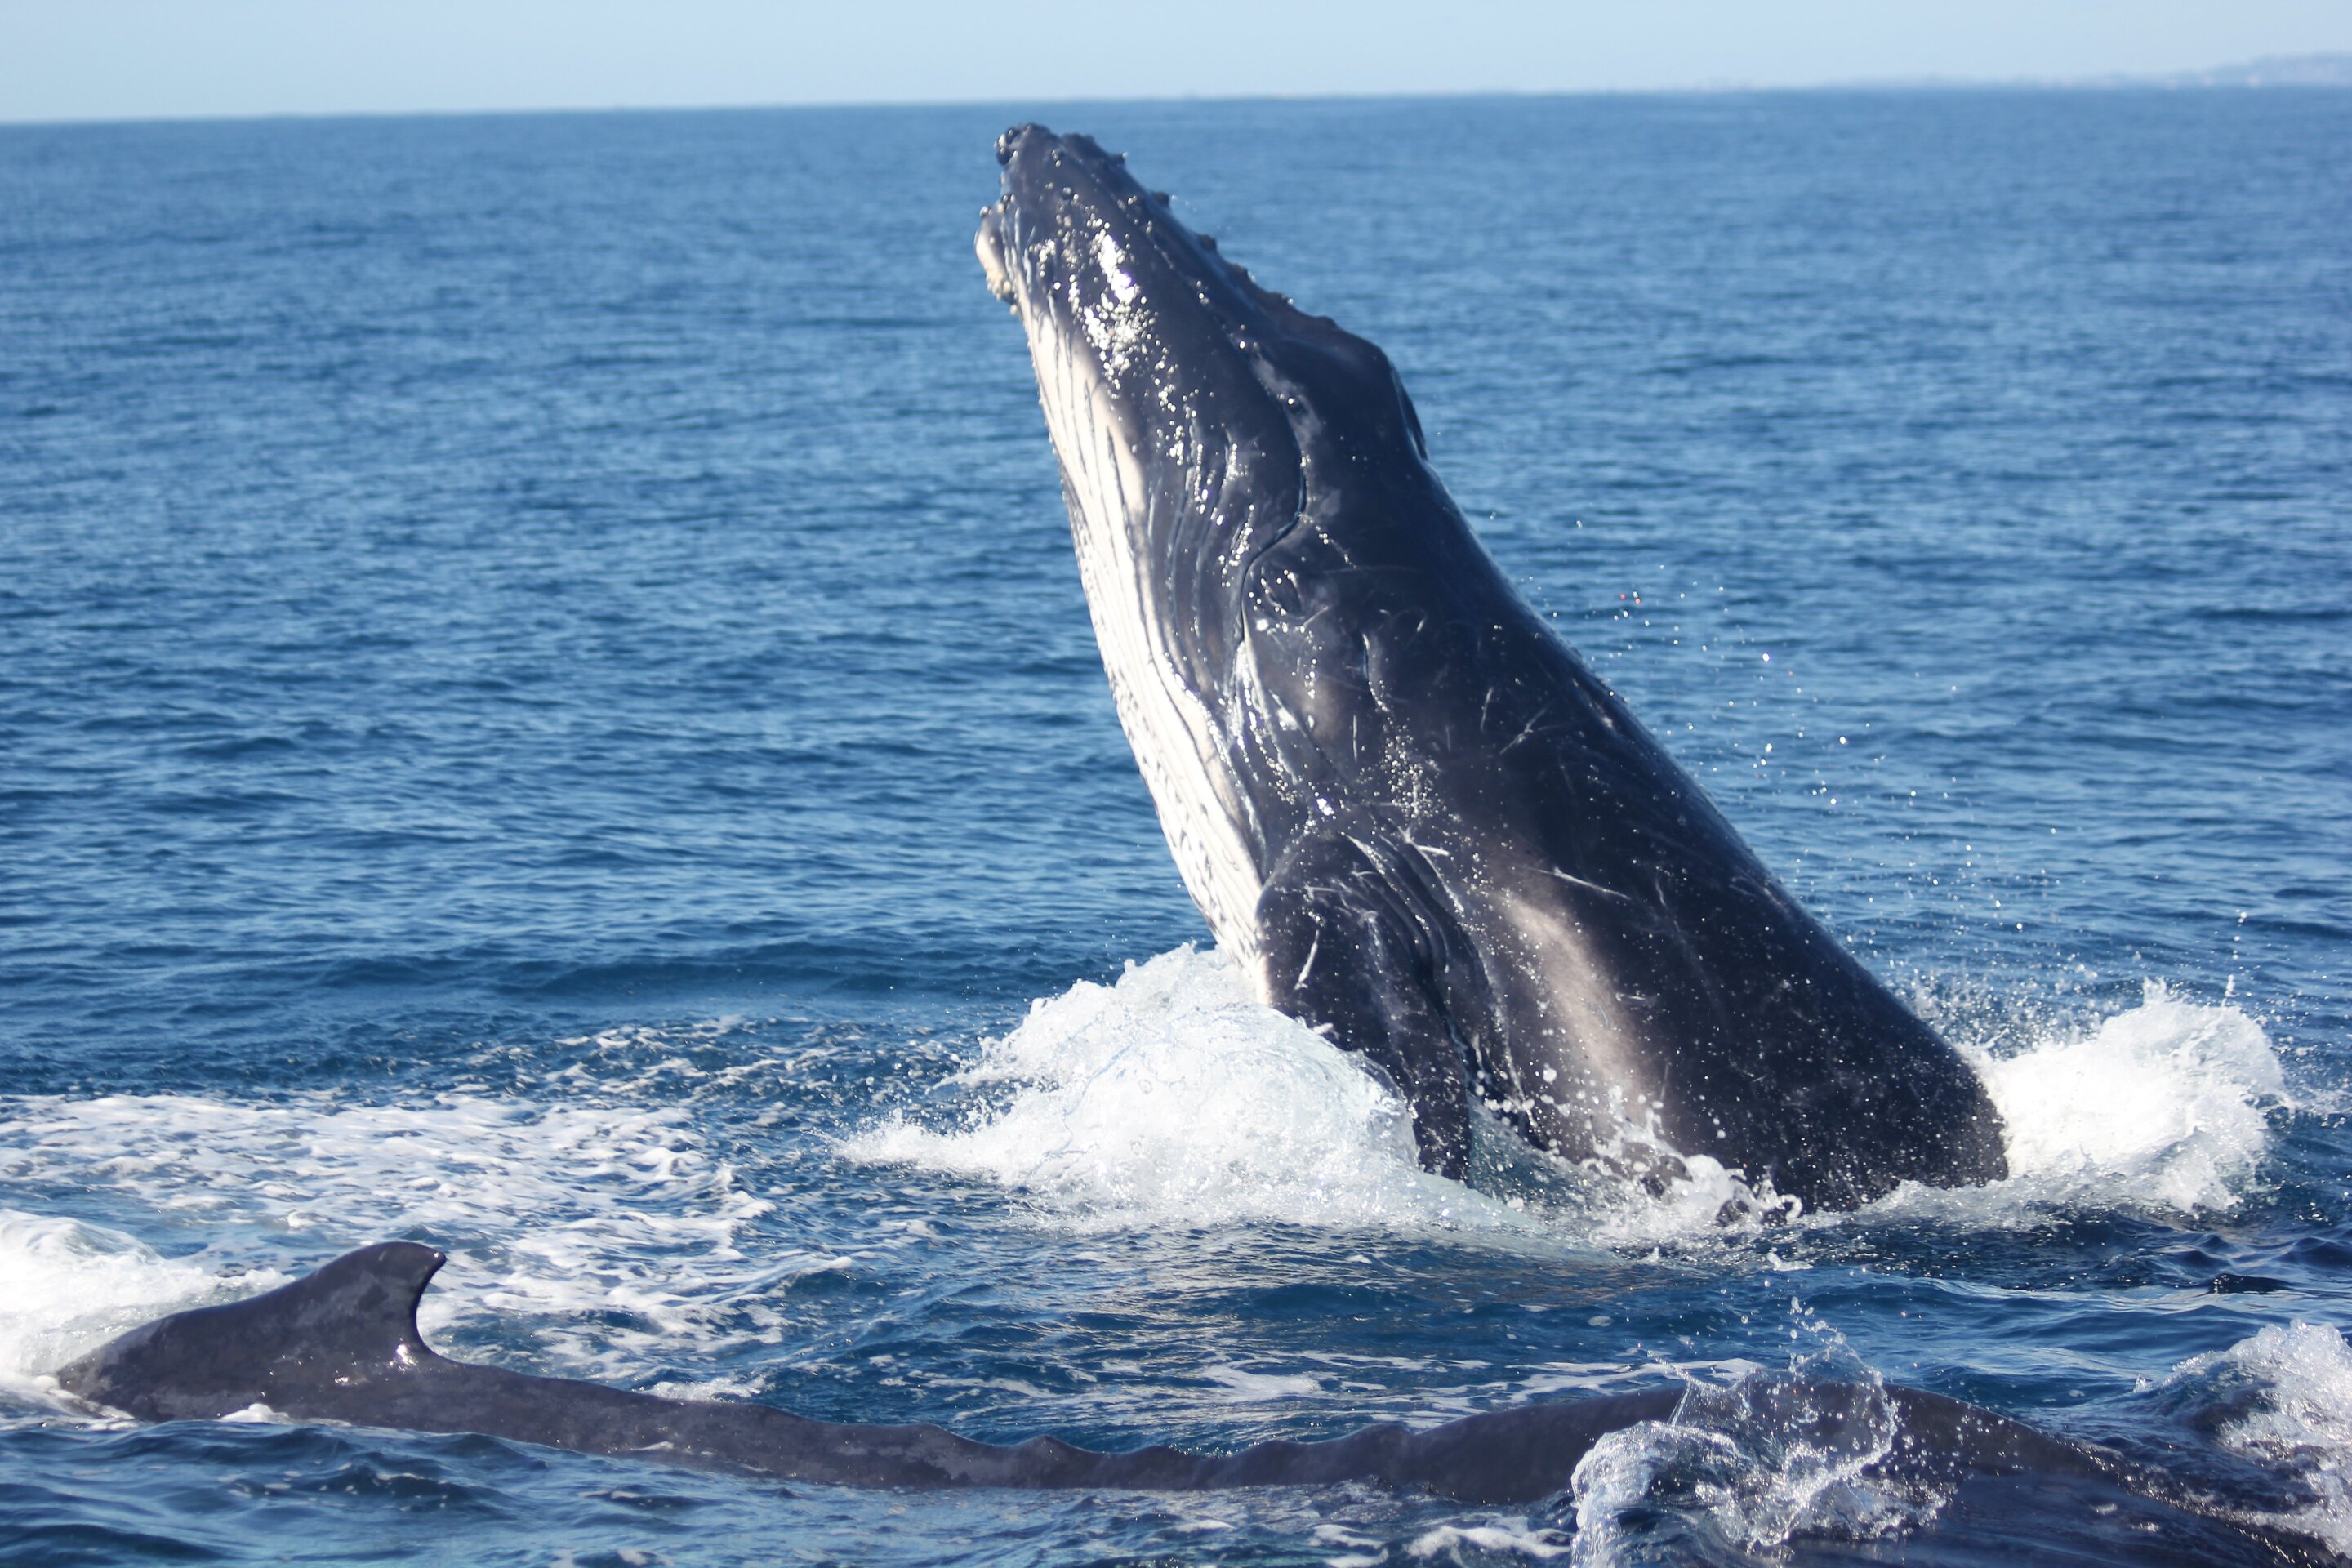 Humpback whales singing are influenced by wind noise, not boats.